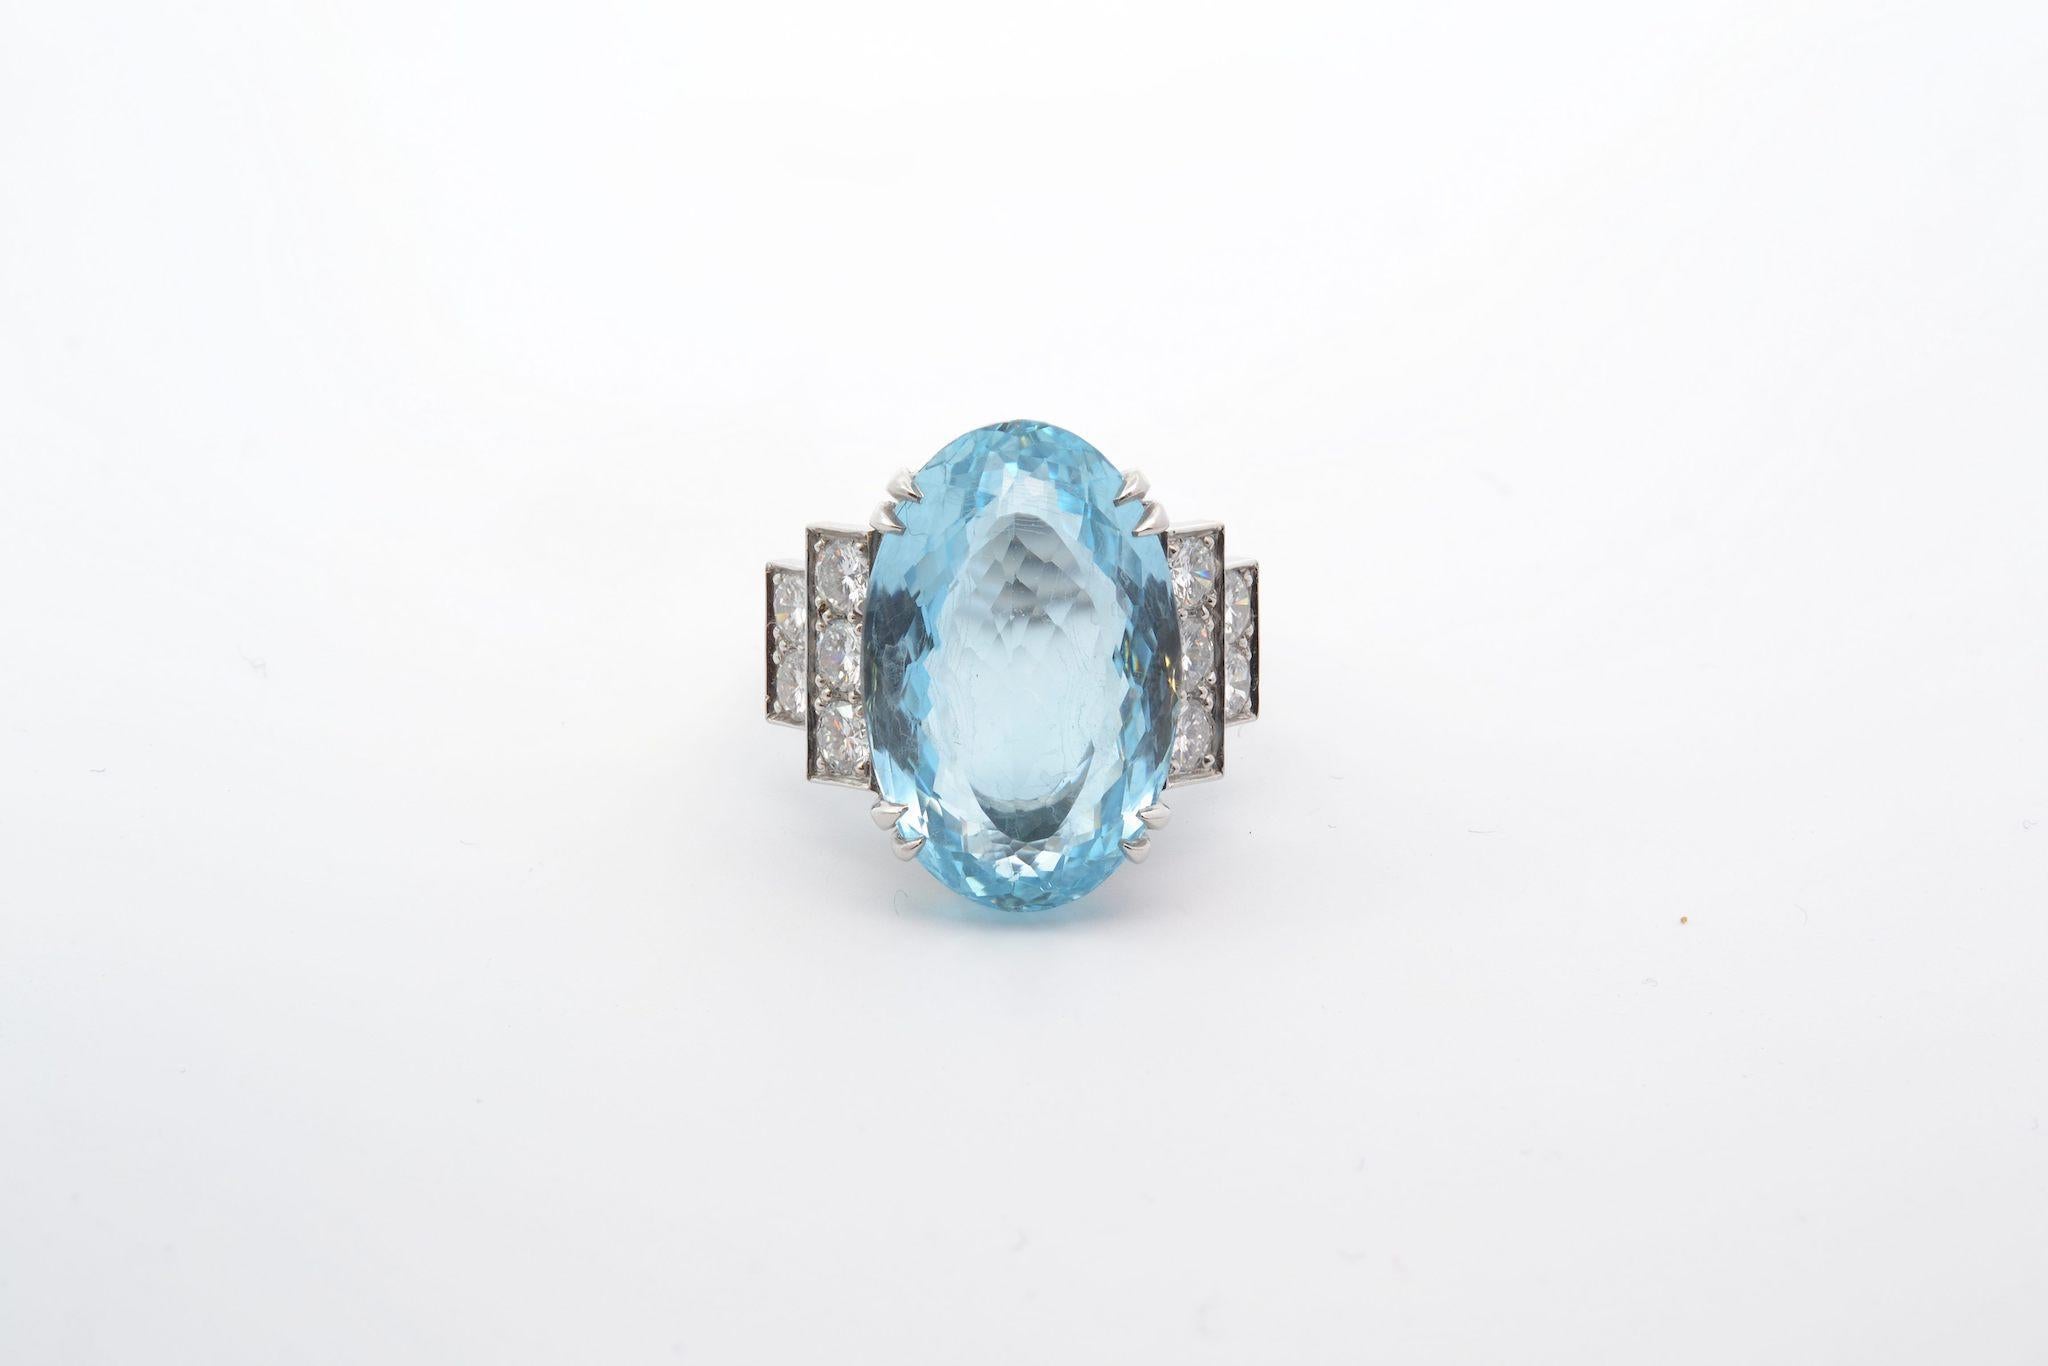 Stones: Aquamarine of 20.88 cts, 10 diamonds: 1.28 cts
Material: Platinum
Dimensions: 2.2cm x 1.4cm
Weight: 14.7g
Period: Recent
Size: 53 (free sizing)
Certificate
Ref. : 25029 25180